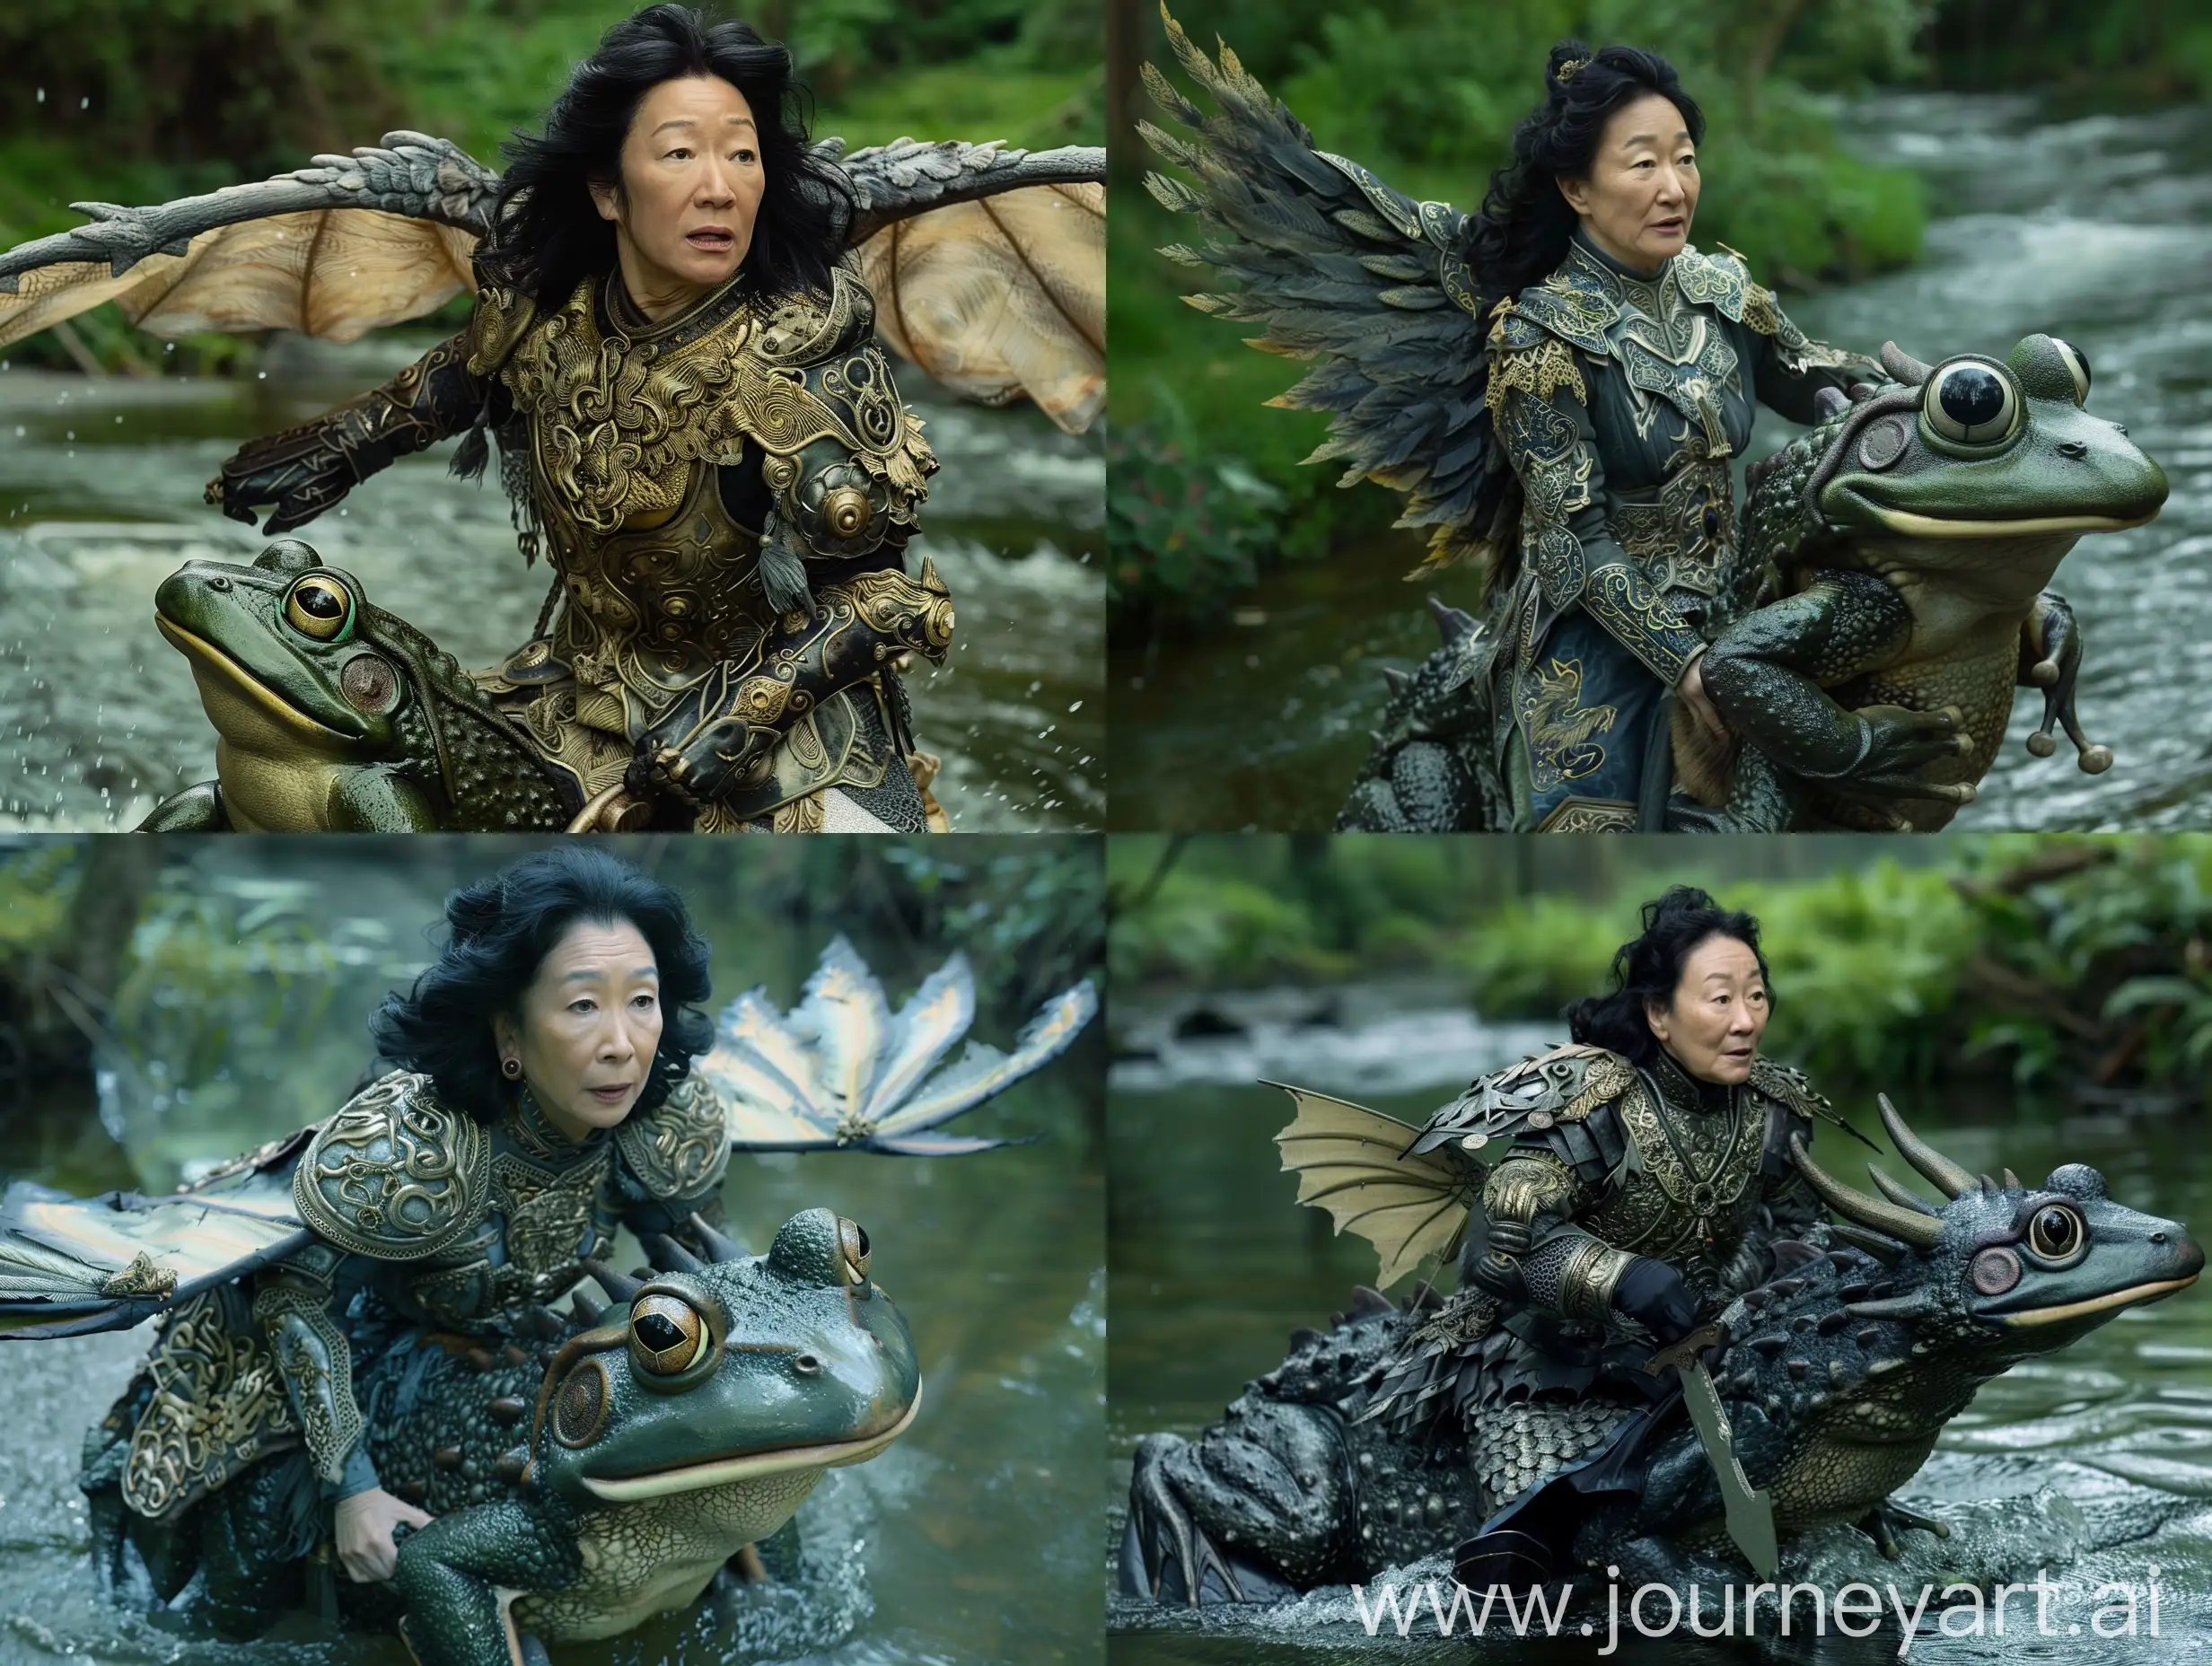 Sandra Oh dressed in ornate battle outfit with black hair is styled in loose wavy manner that frames her face and the waves cascade over her shouldersShe is riding huge winged dragonlike frog knight along river in the forest kid's fantasy movie still motion blur ar niji style raw Image
